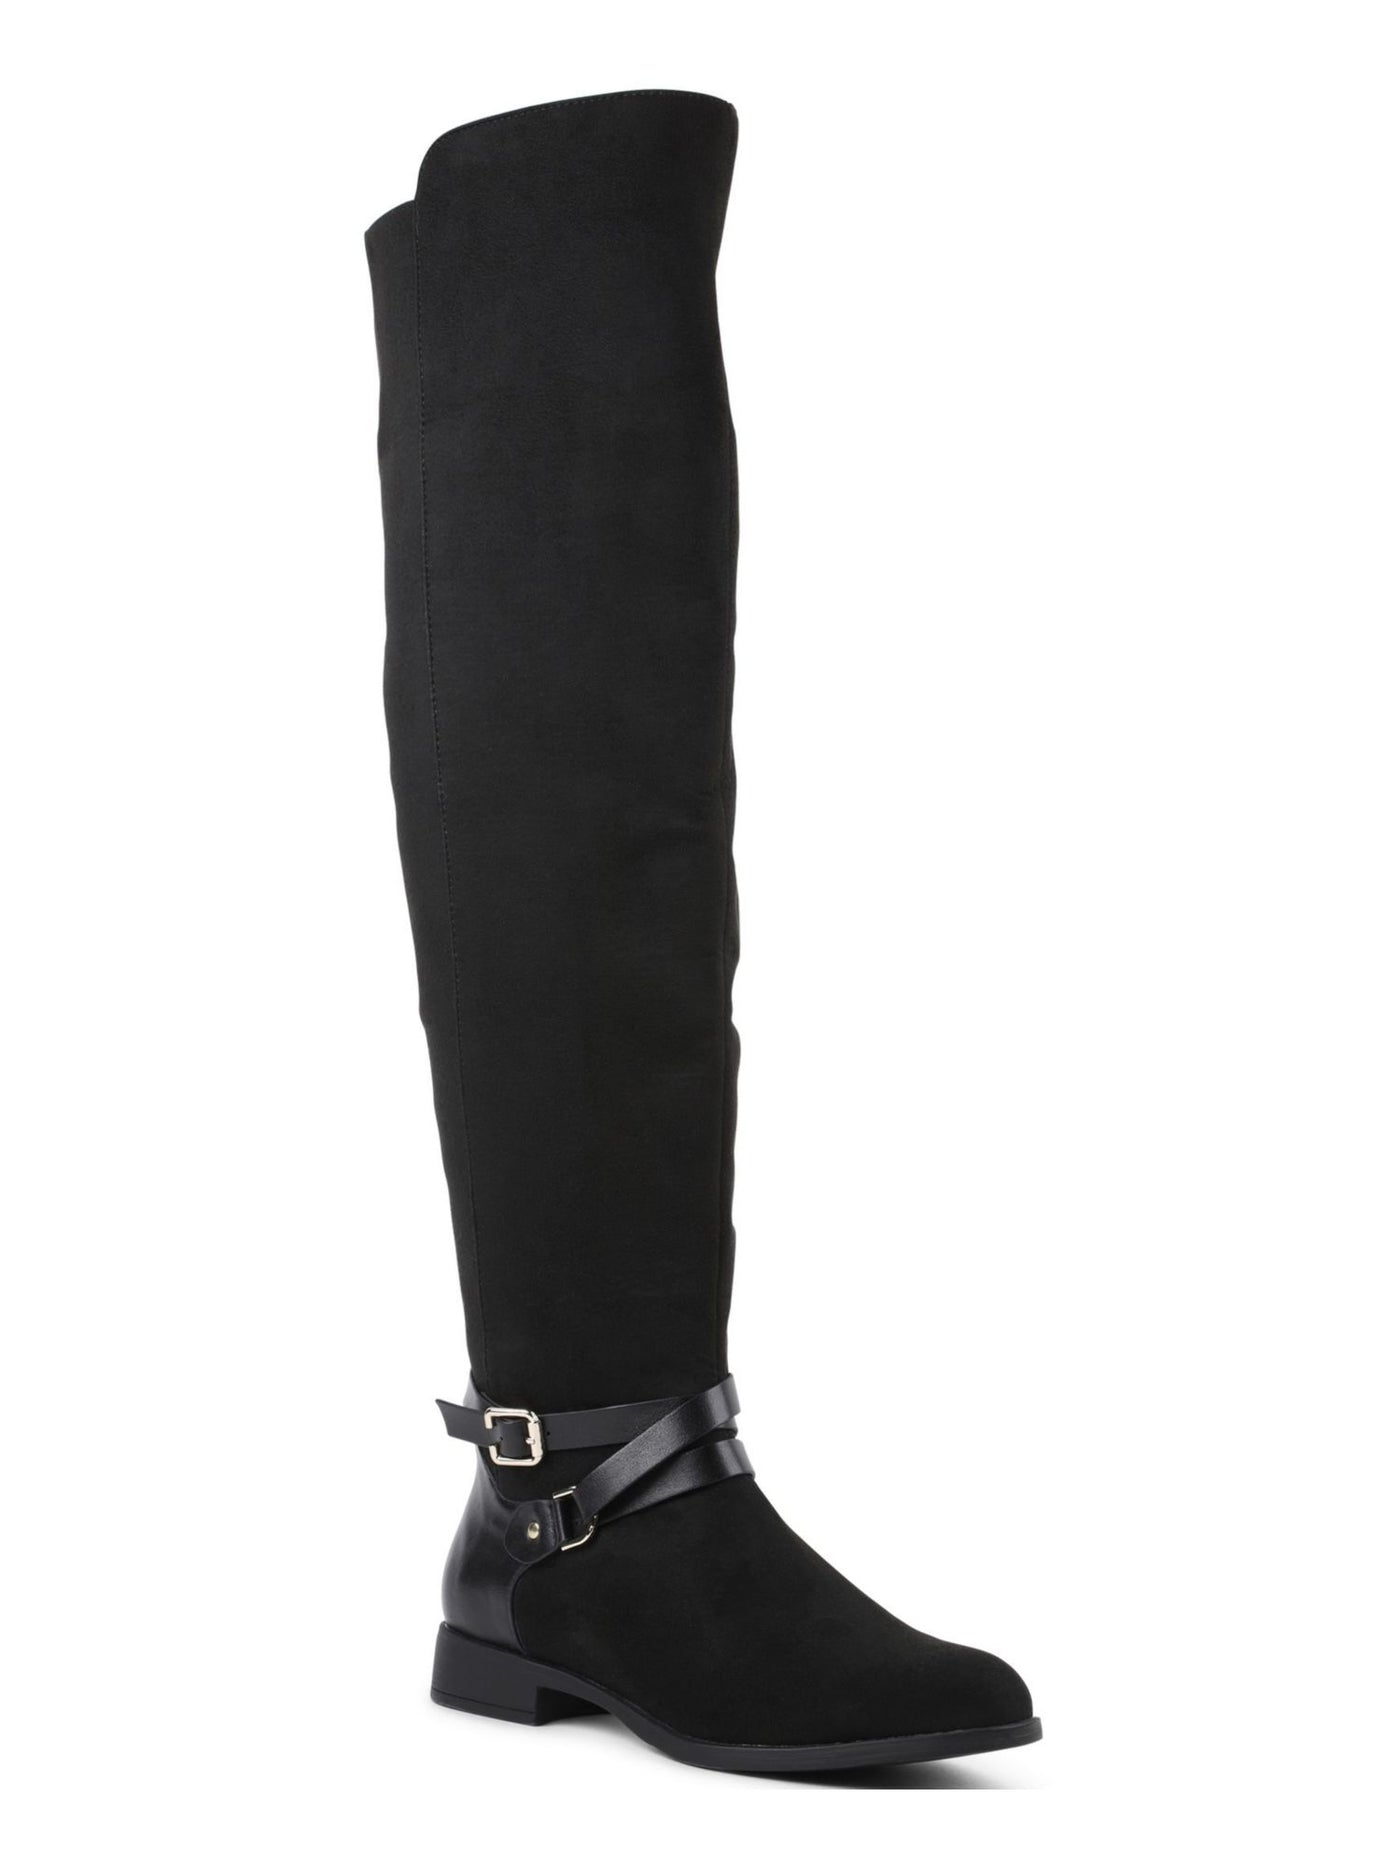 XOXO Womens Black Buckle Accent Stretch Dress Boots Shoes 5.5